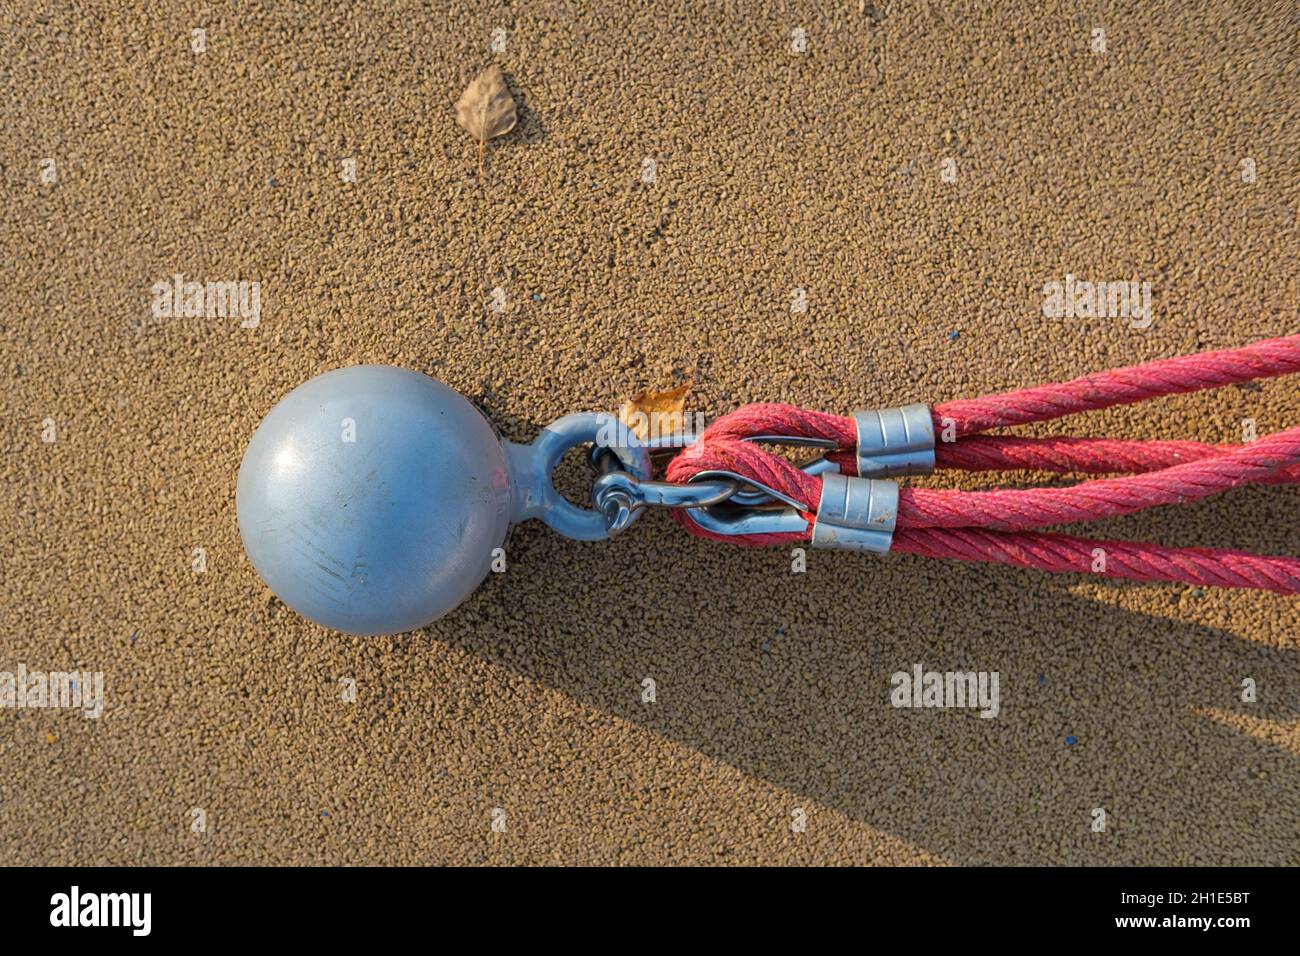 Metal fastening and a red rope, on the playground, against the background of a soft surface, outdoors.  Stock Photo